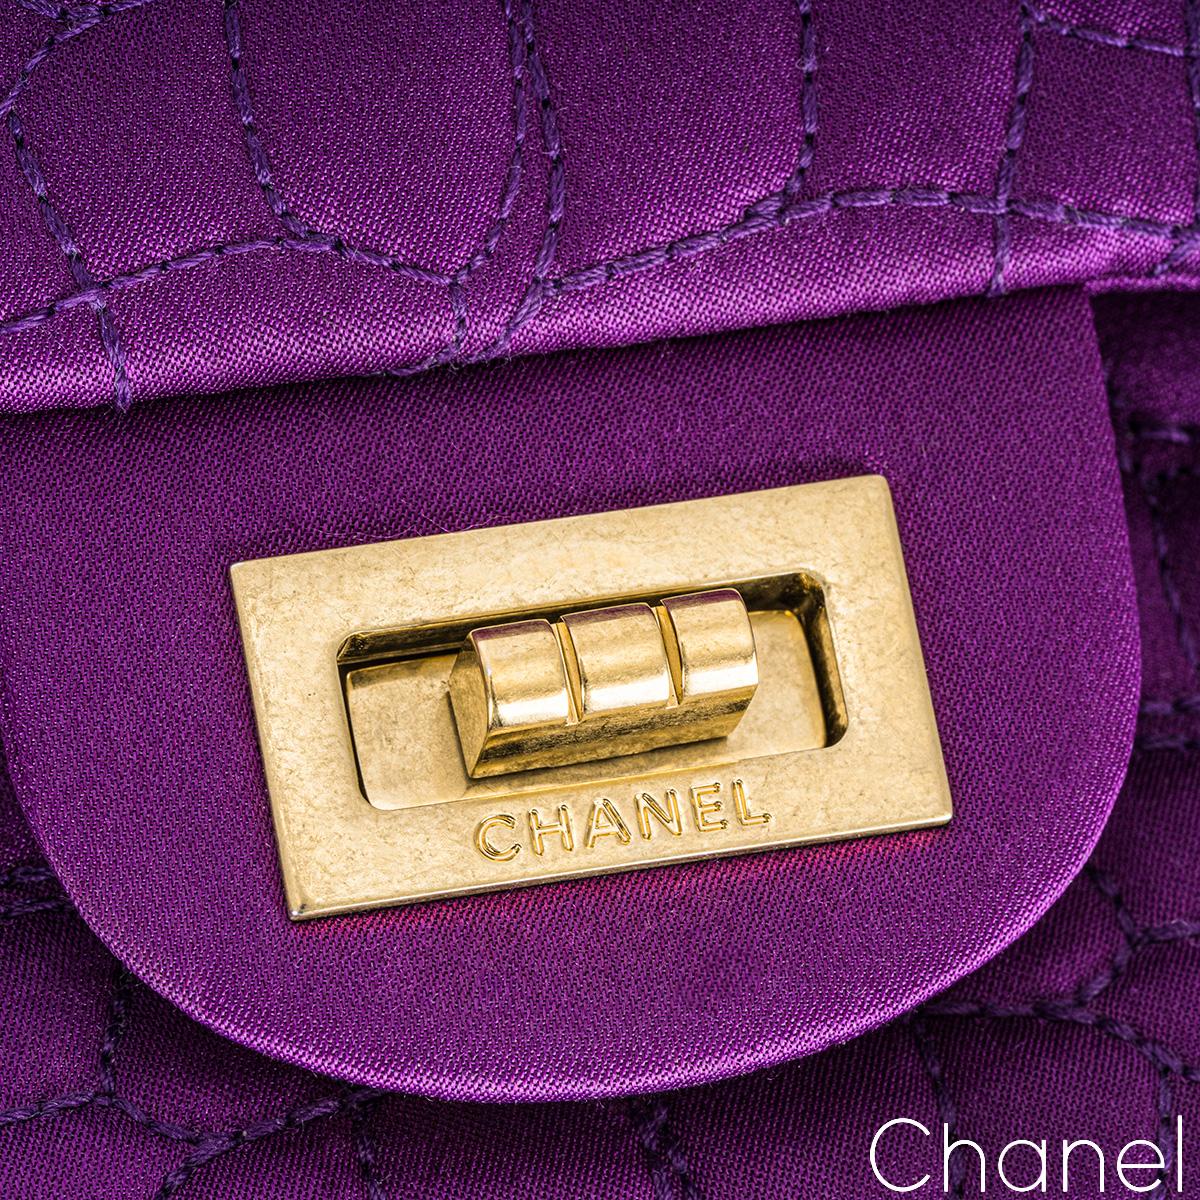 Chanel Purple Satin 2.55 Reissue Small 255 Bag For Sale 2